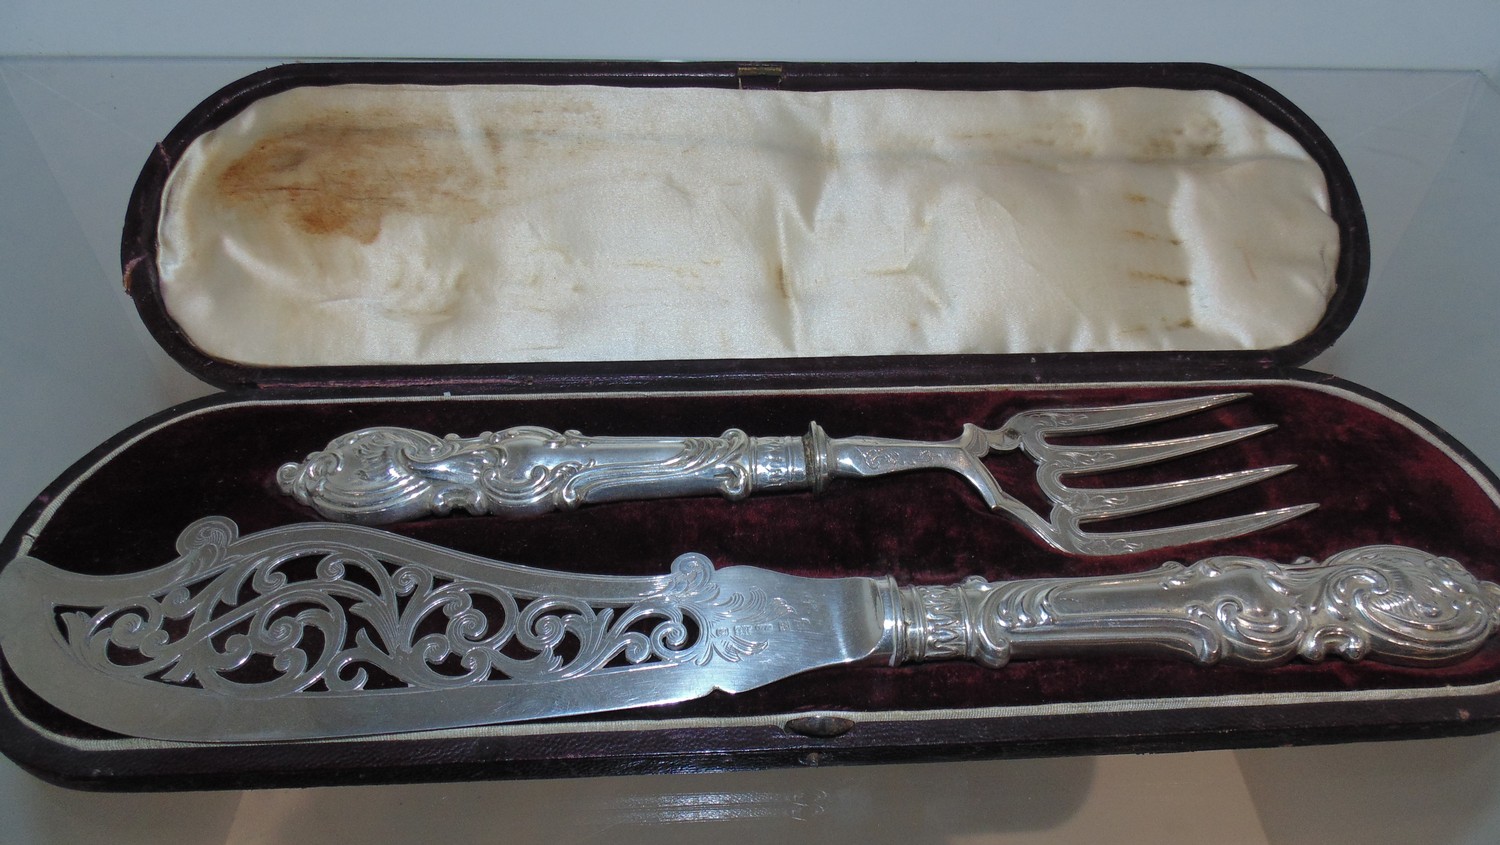 Cake knife and fork in leather bound display case - Image 2 of 3